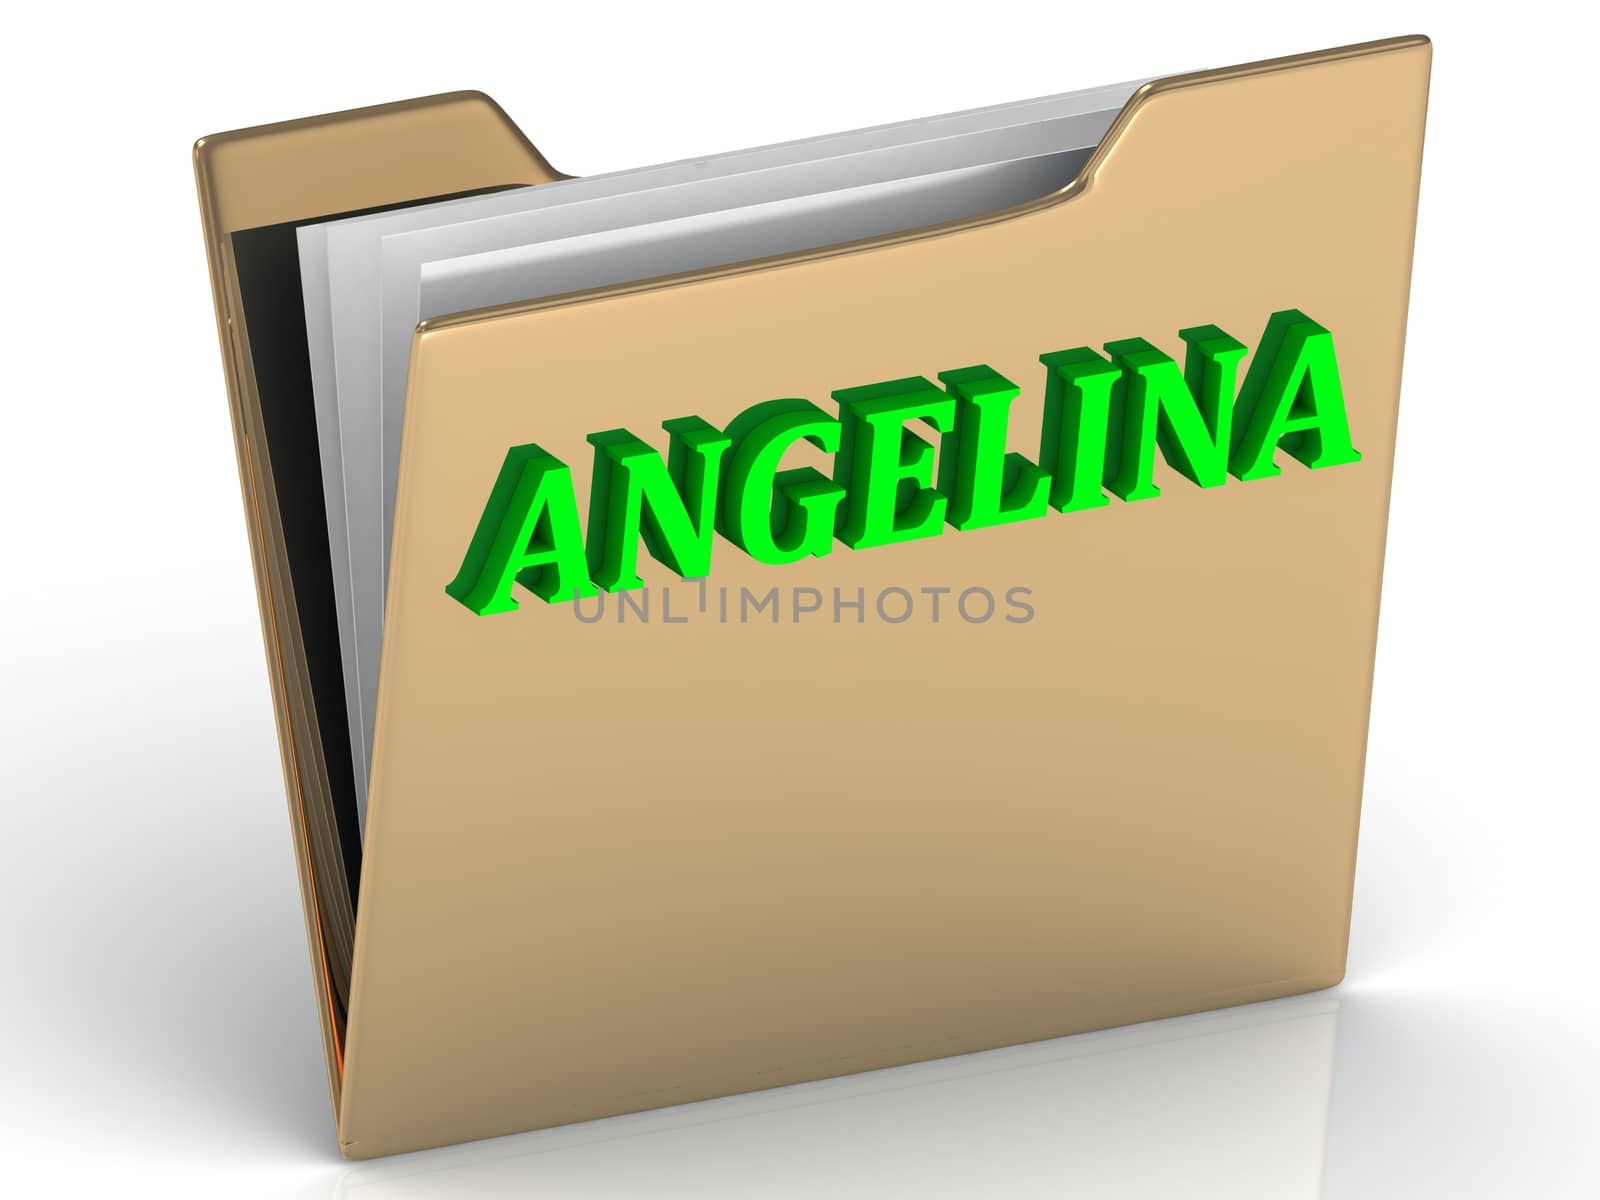 ANGELINA- bright green letters on gold paperwork folder by GreenMost